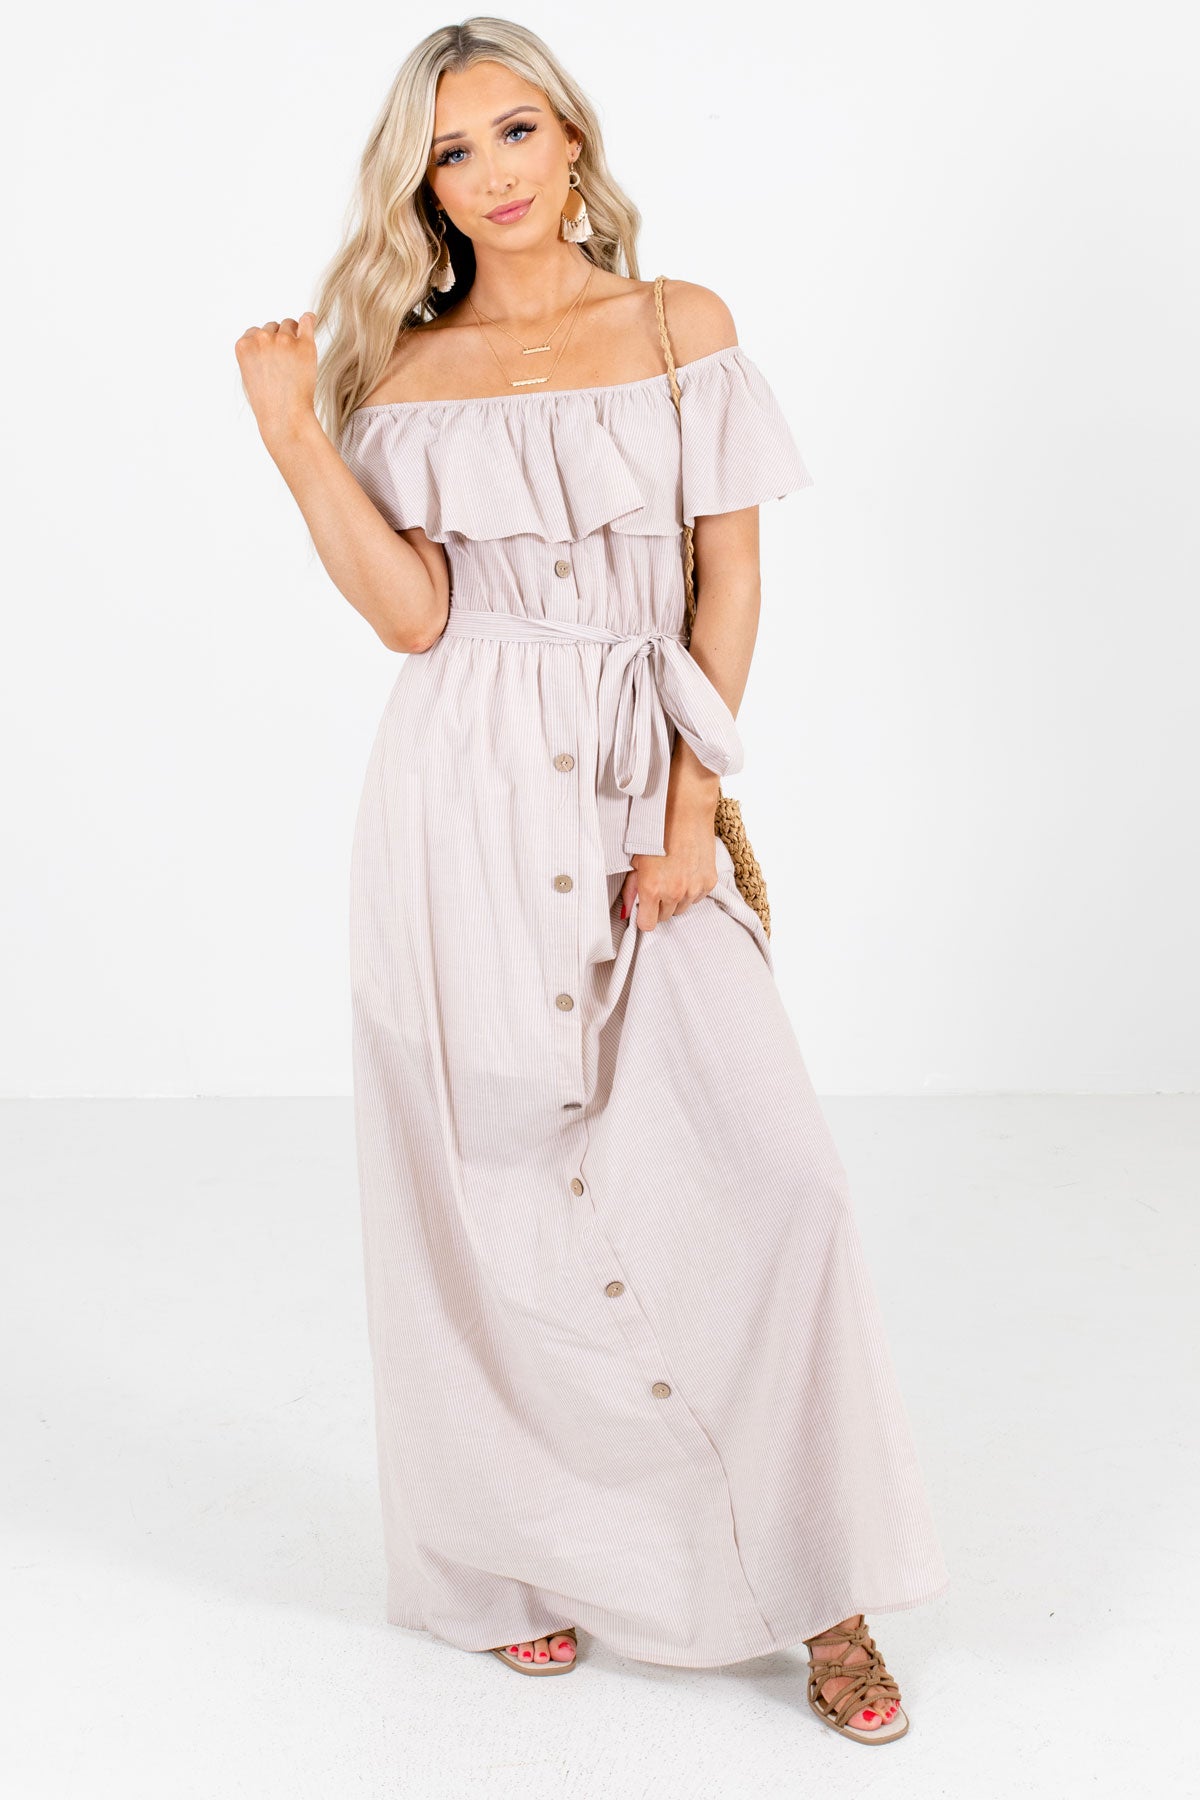 Taupe and White Striped Boutique Maxi Dresses for Women